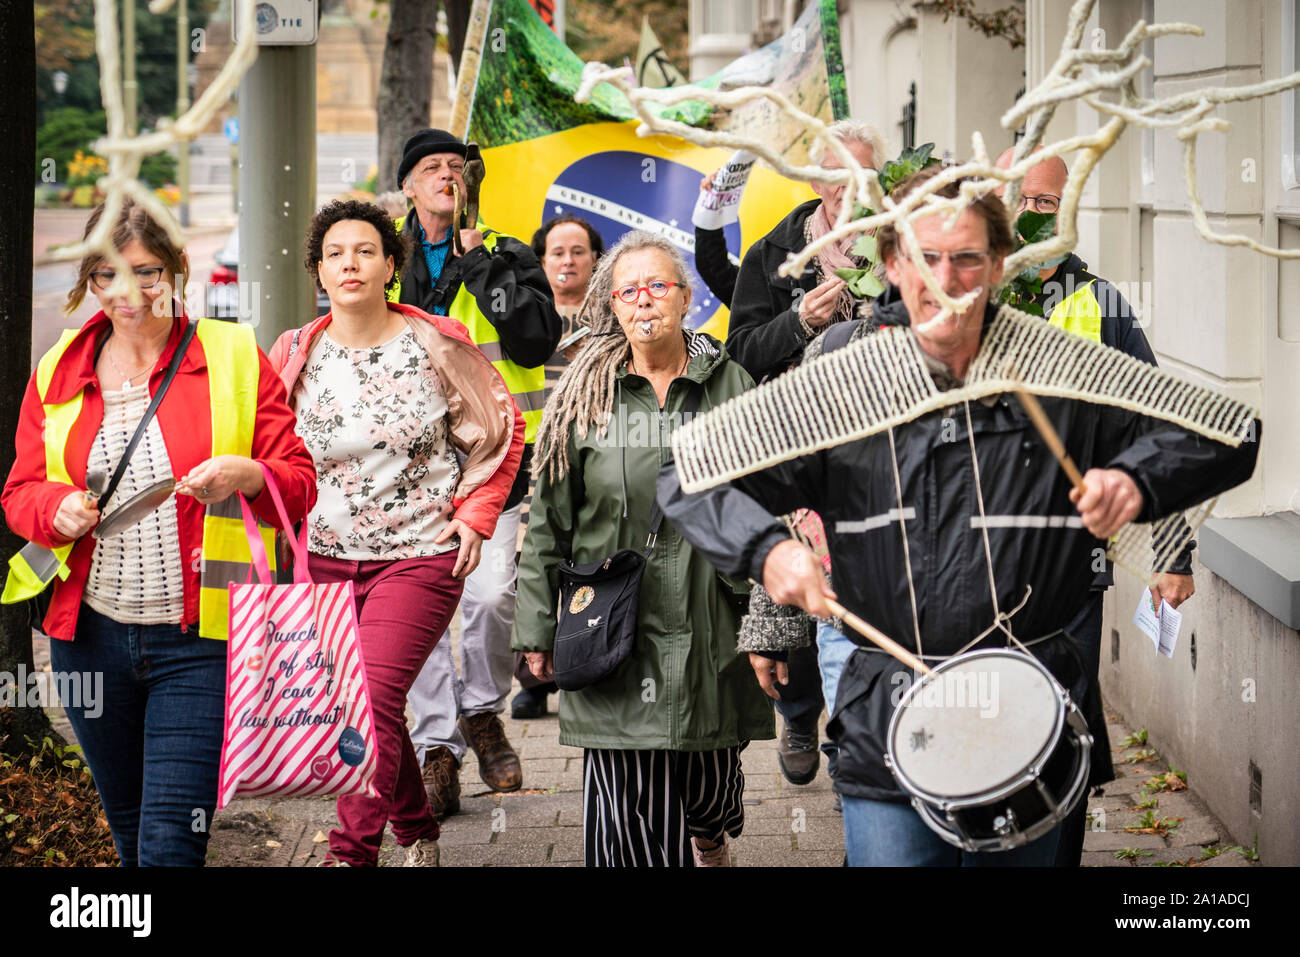 Den Haag, Netherlands. 25th Sep, 2019. DEN HAAG, 25-09-2019, Demonstration against cutting down threes at the Amazone rainforest in Brazil. Credit: Pro Shots/Alamy Live News Stock Photo